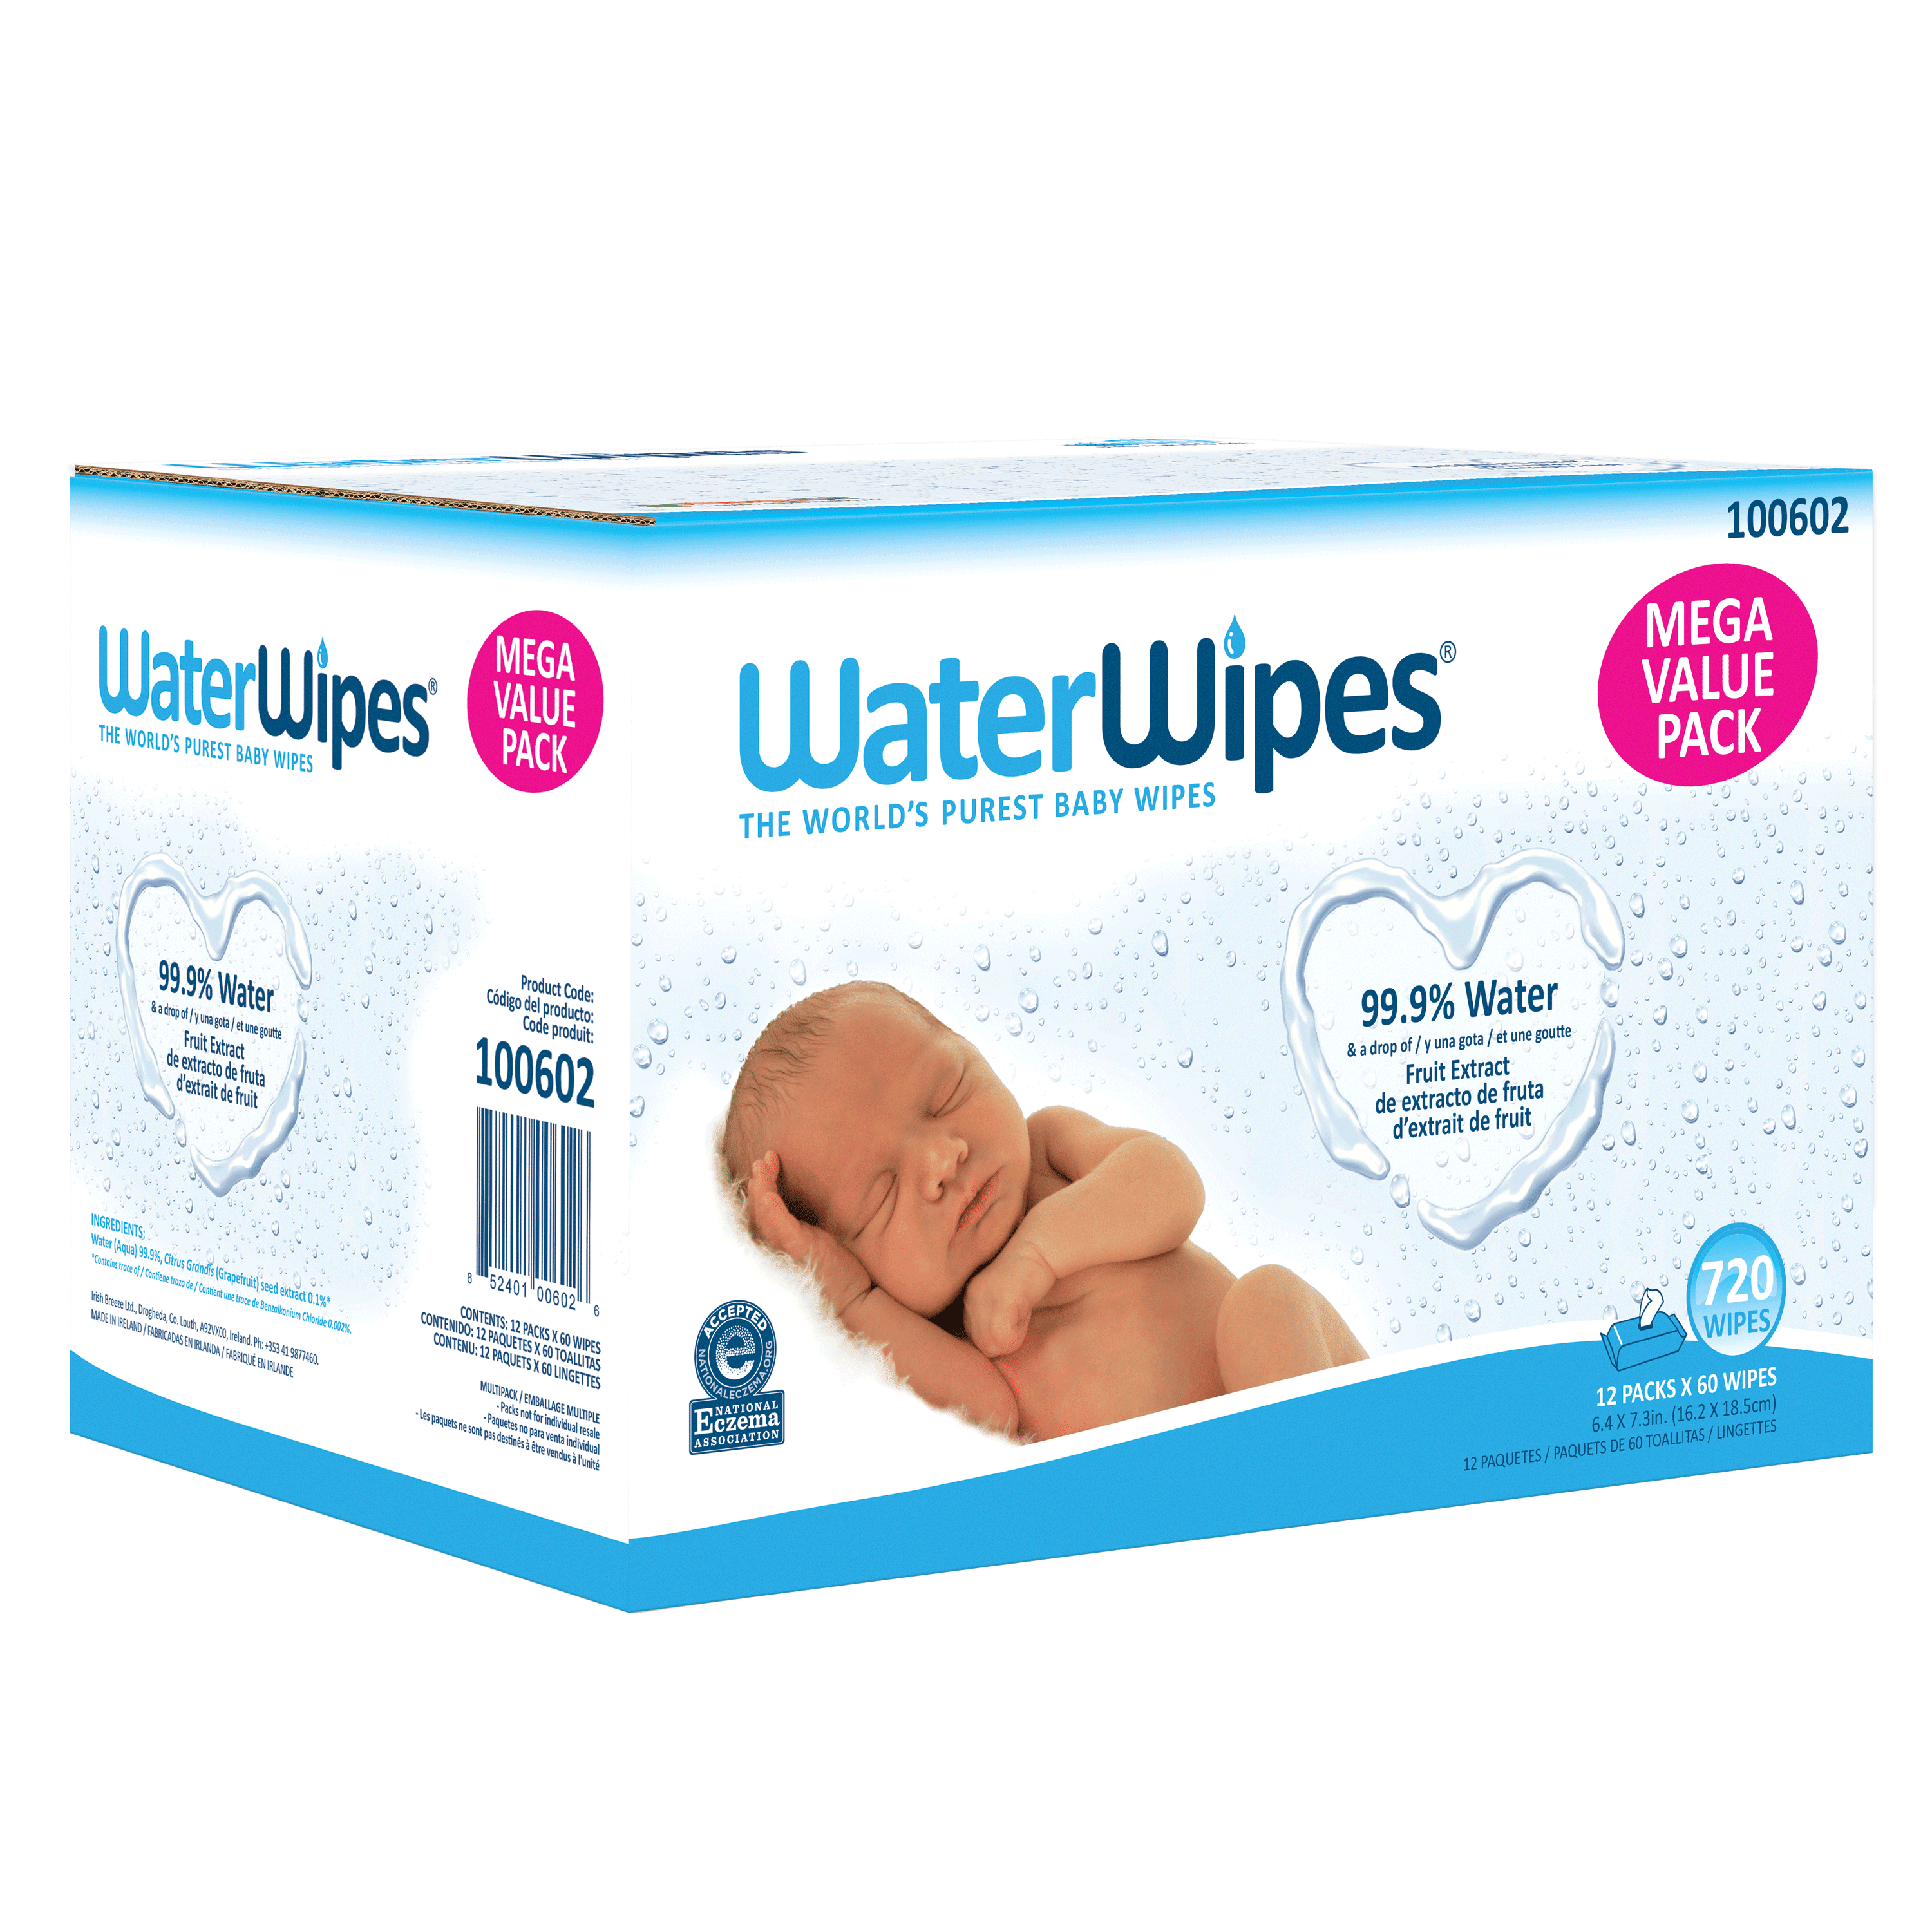 12 x 60 Wipes WaterWipes Baby Wipes Super Value Box Total 720 Wipes by WaterWipes